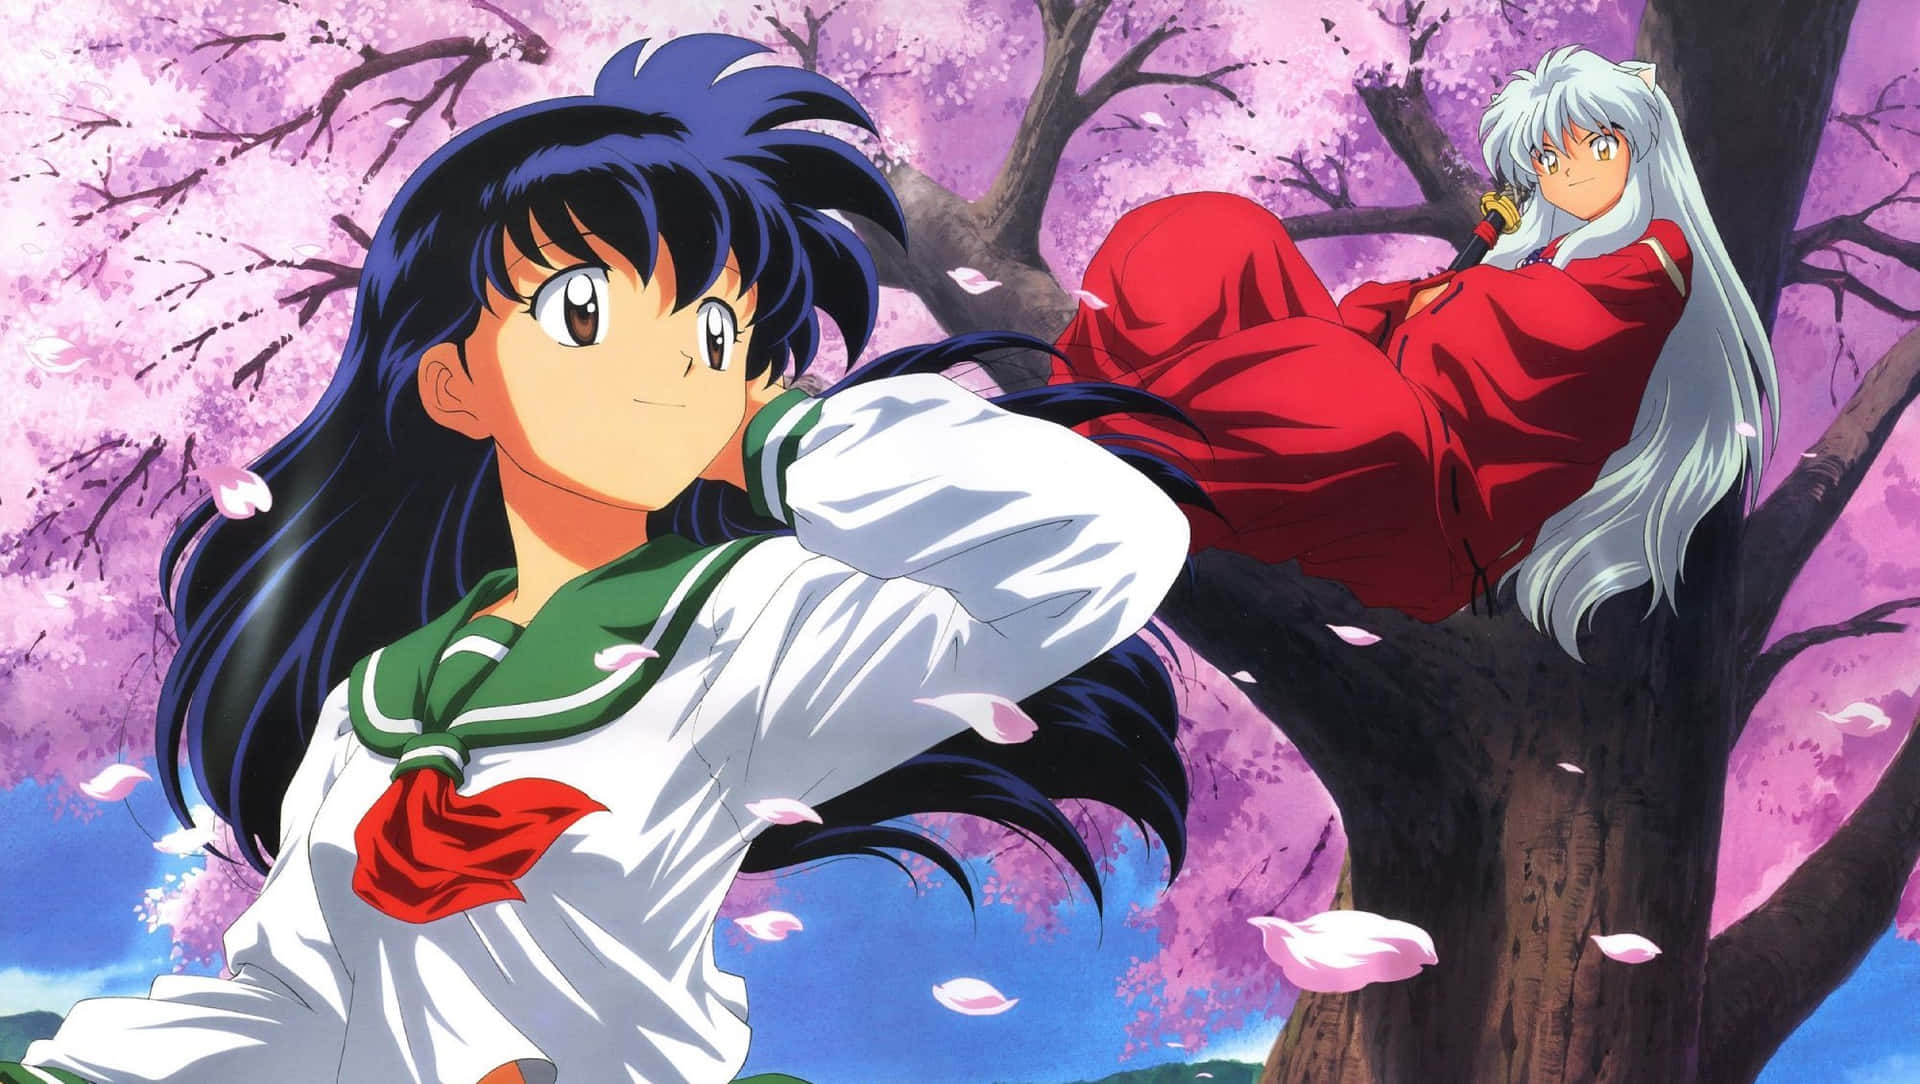 Inuyasha and Kagome embracing each other in a magical forest Wallpaper